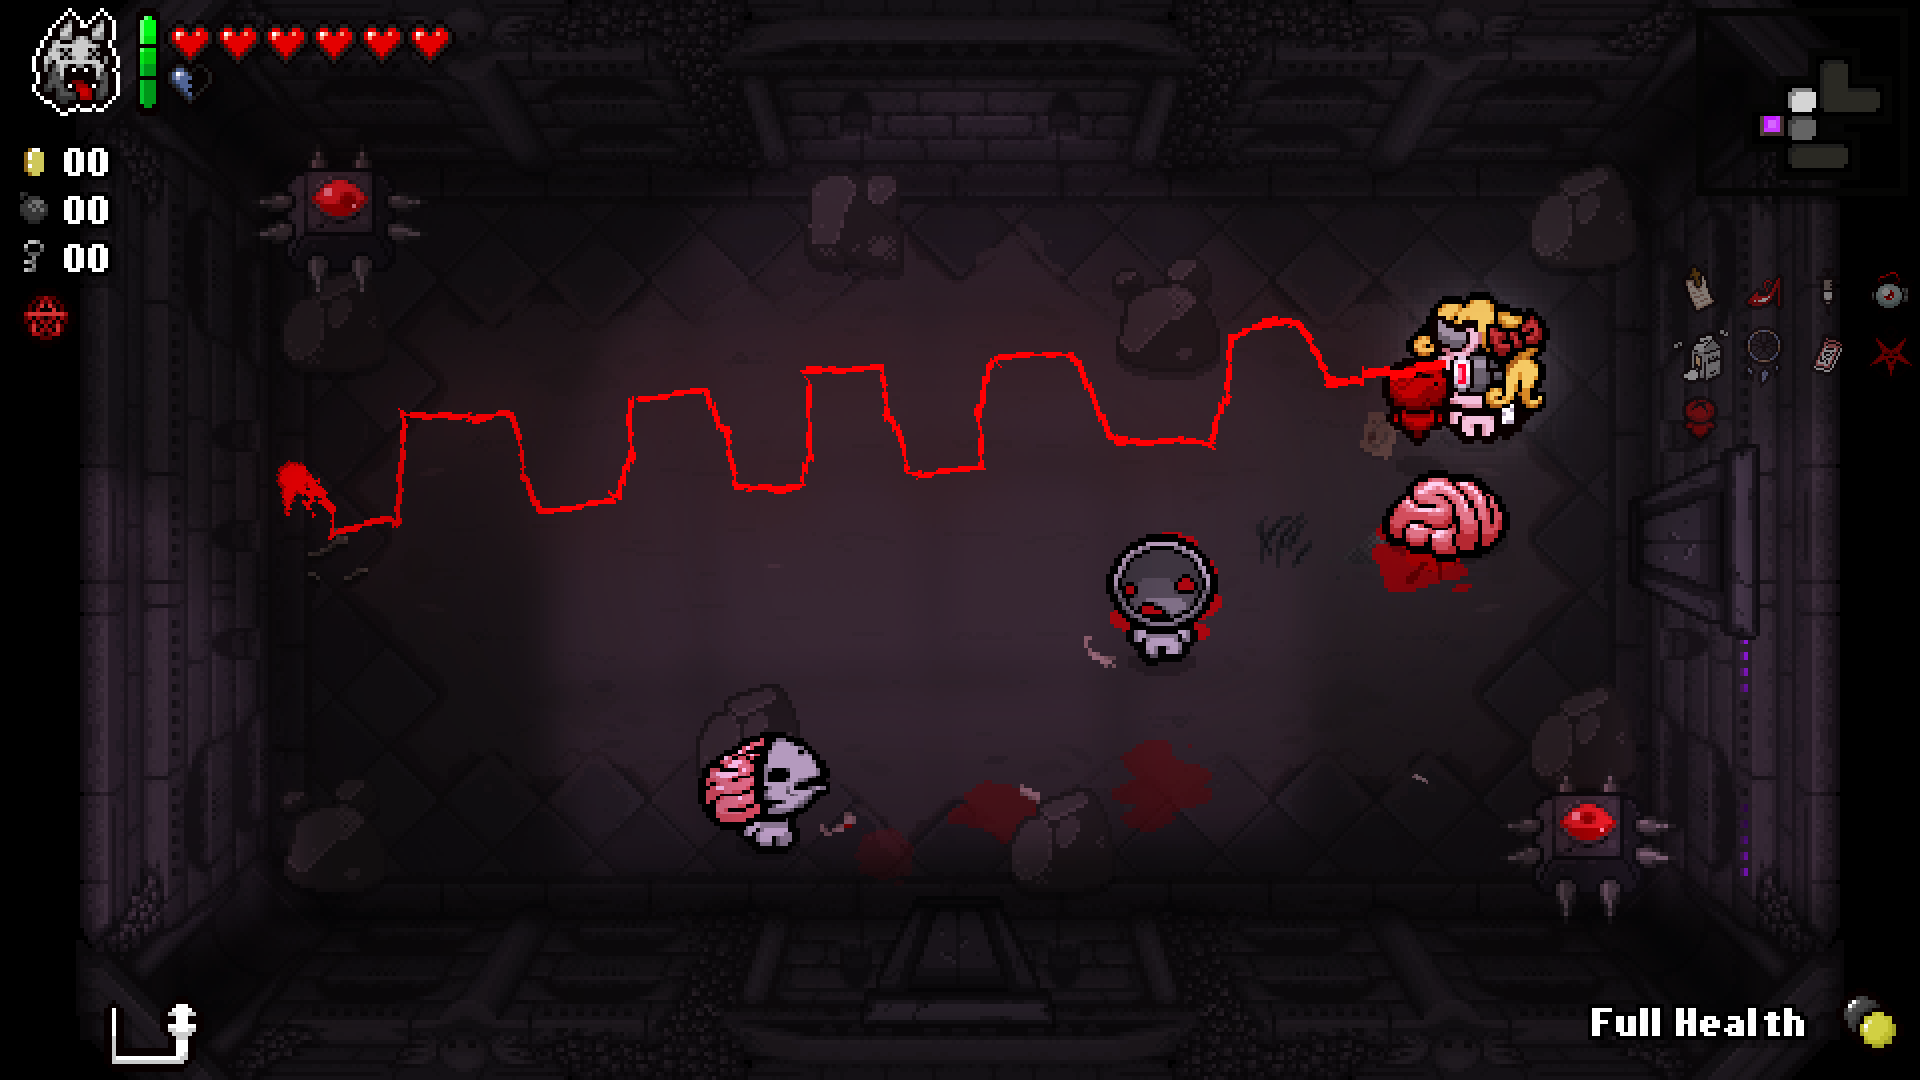 The binding of isaac: repentance - actual online co-op (without streaming)